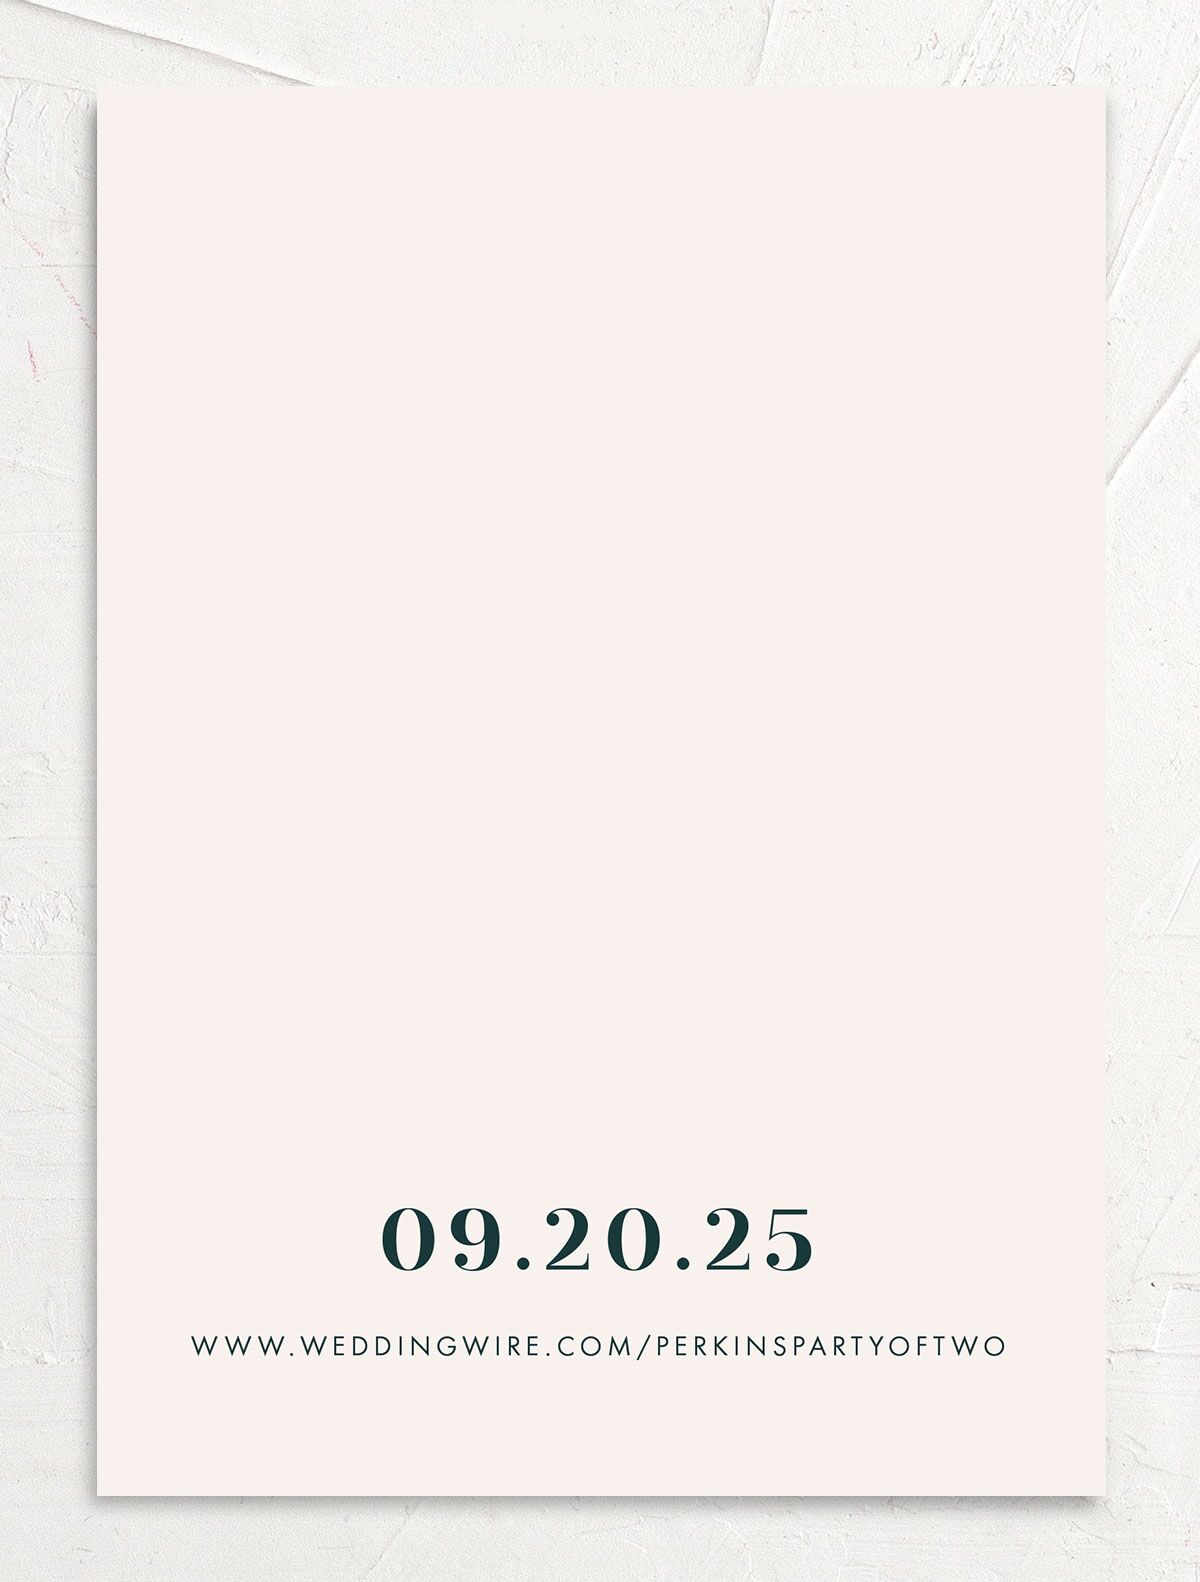 Midcentury Chic Save the Date Cards [object Object] in Teal